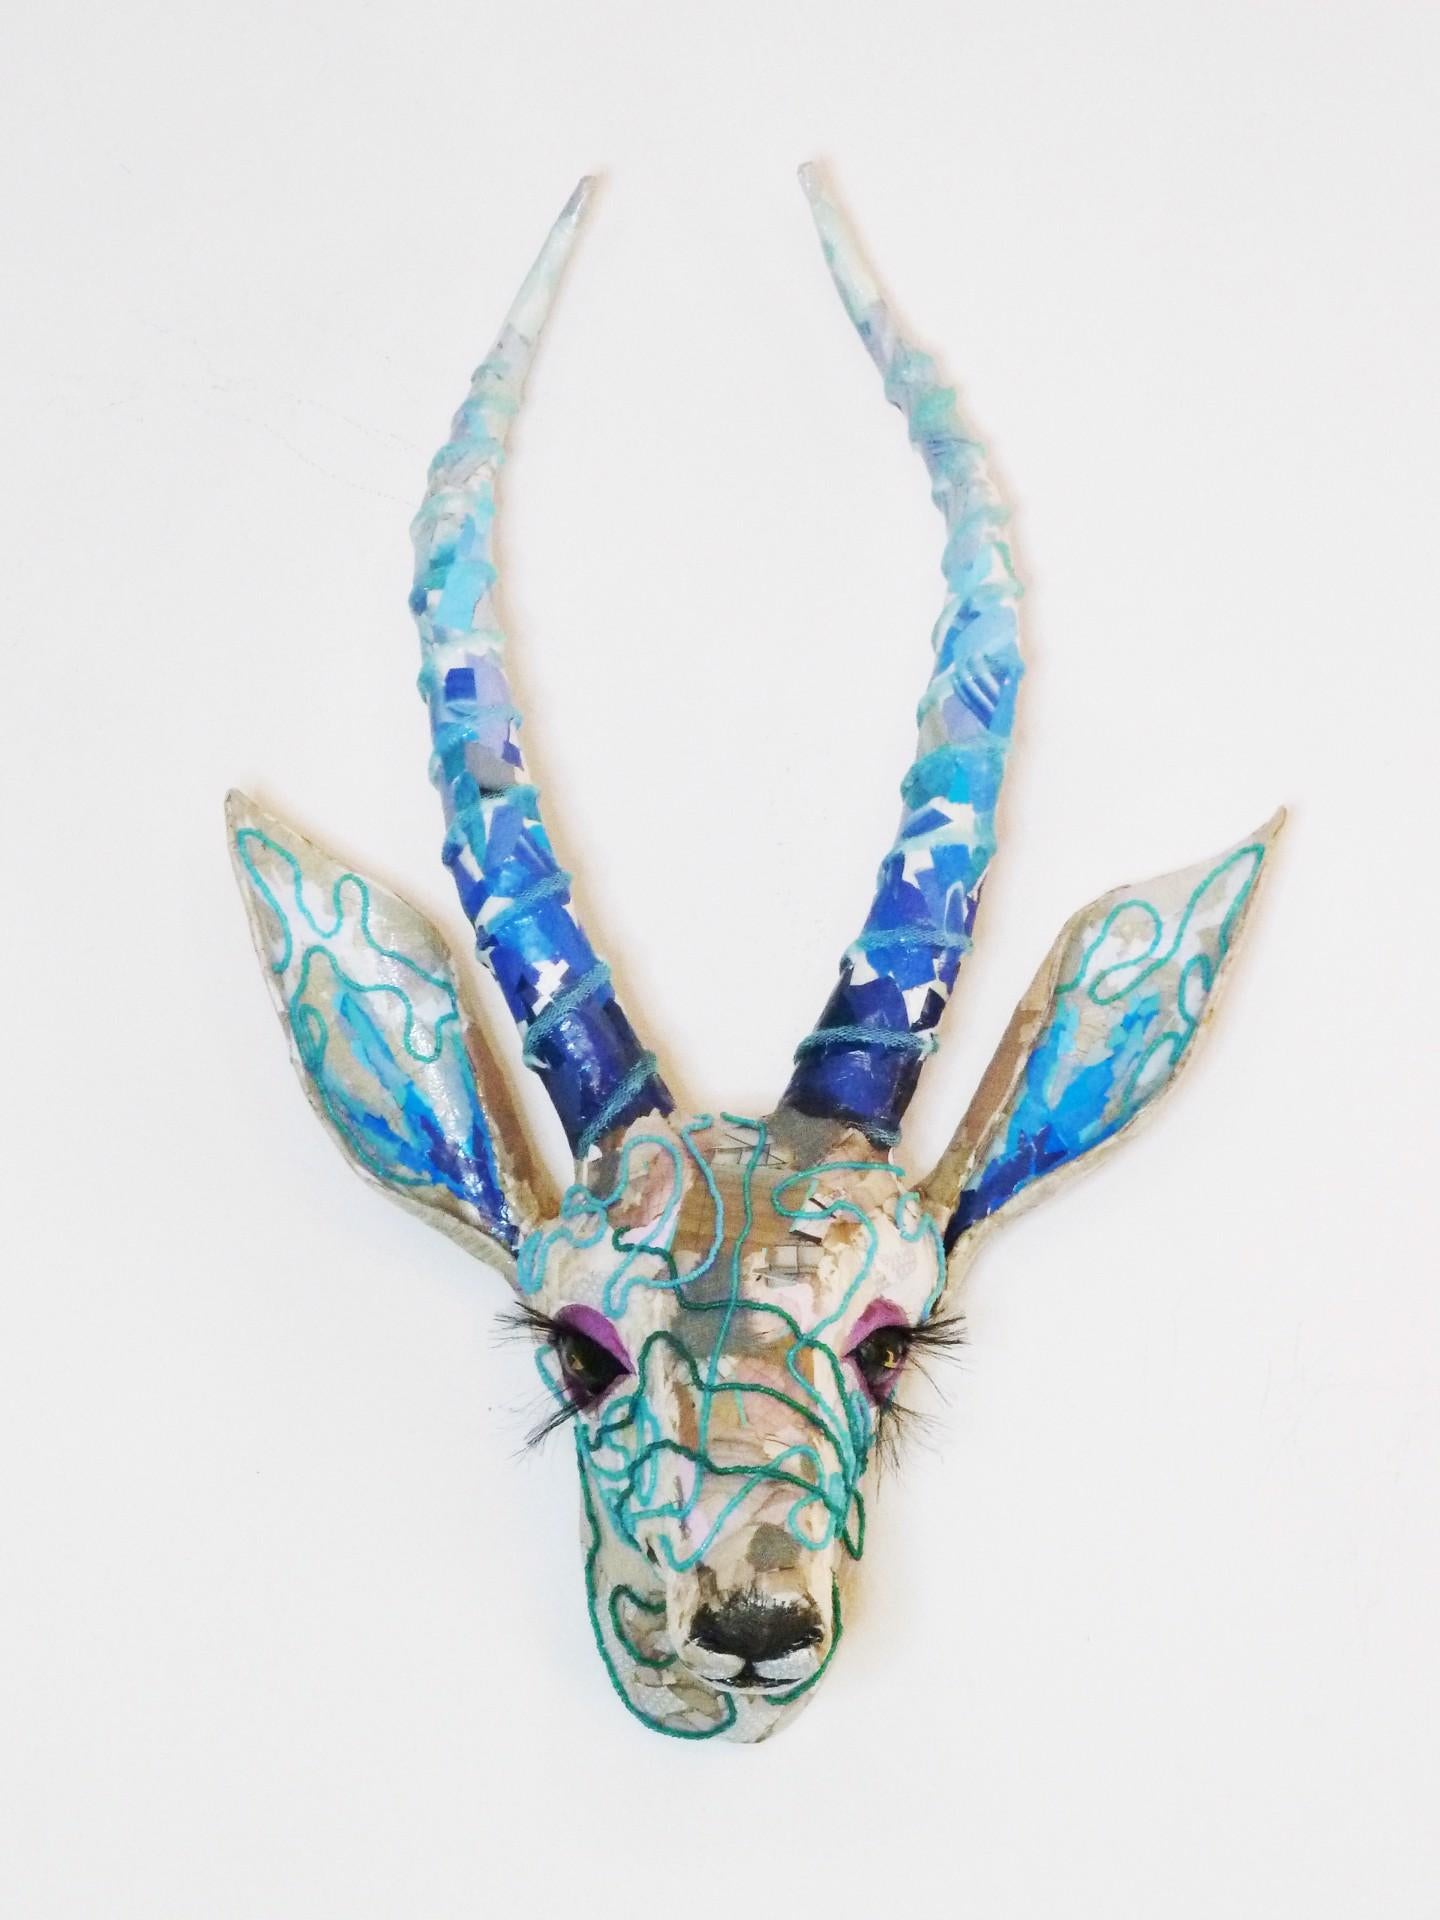 Yulia Shtern Figurative Sculpture - Lula - Incredible Gazelle Wall Sculpture from Up-Cycled Materials (Blue + White)